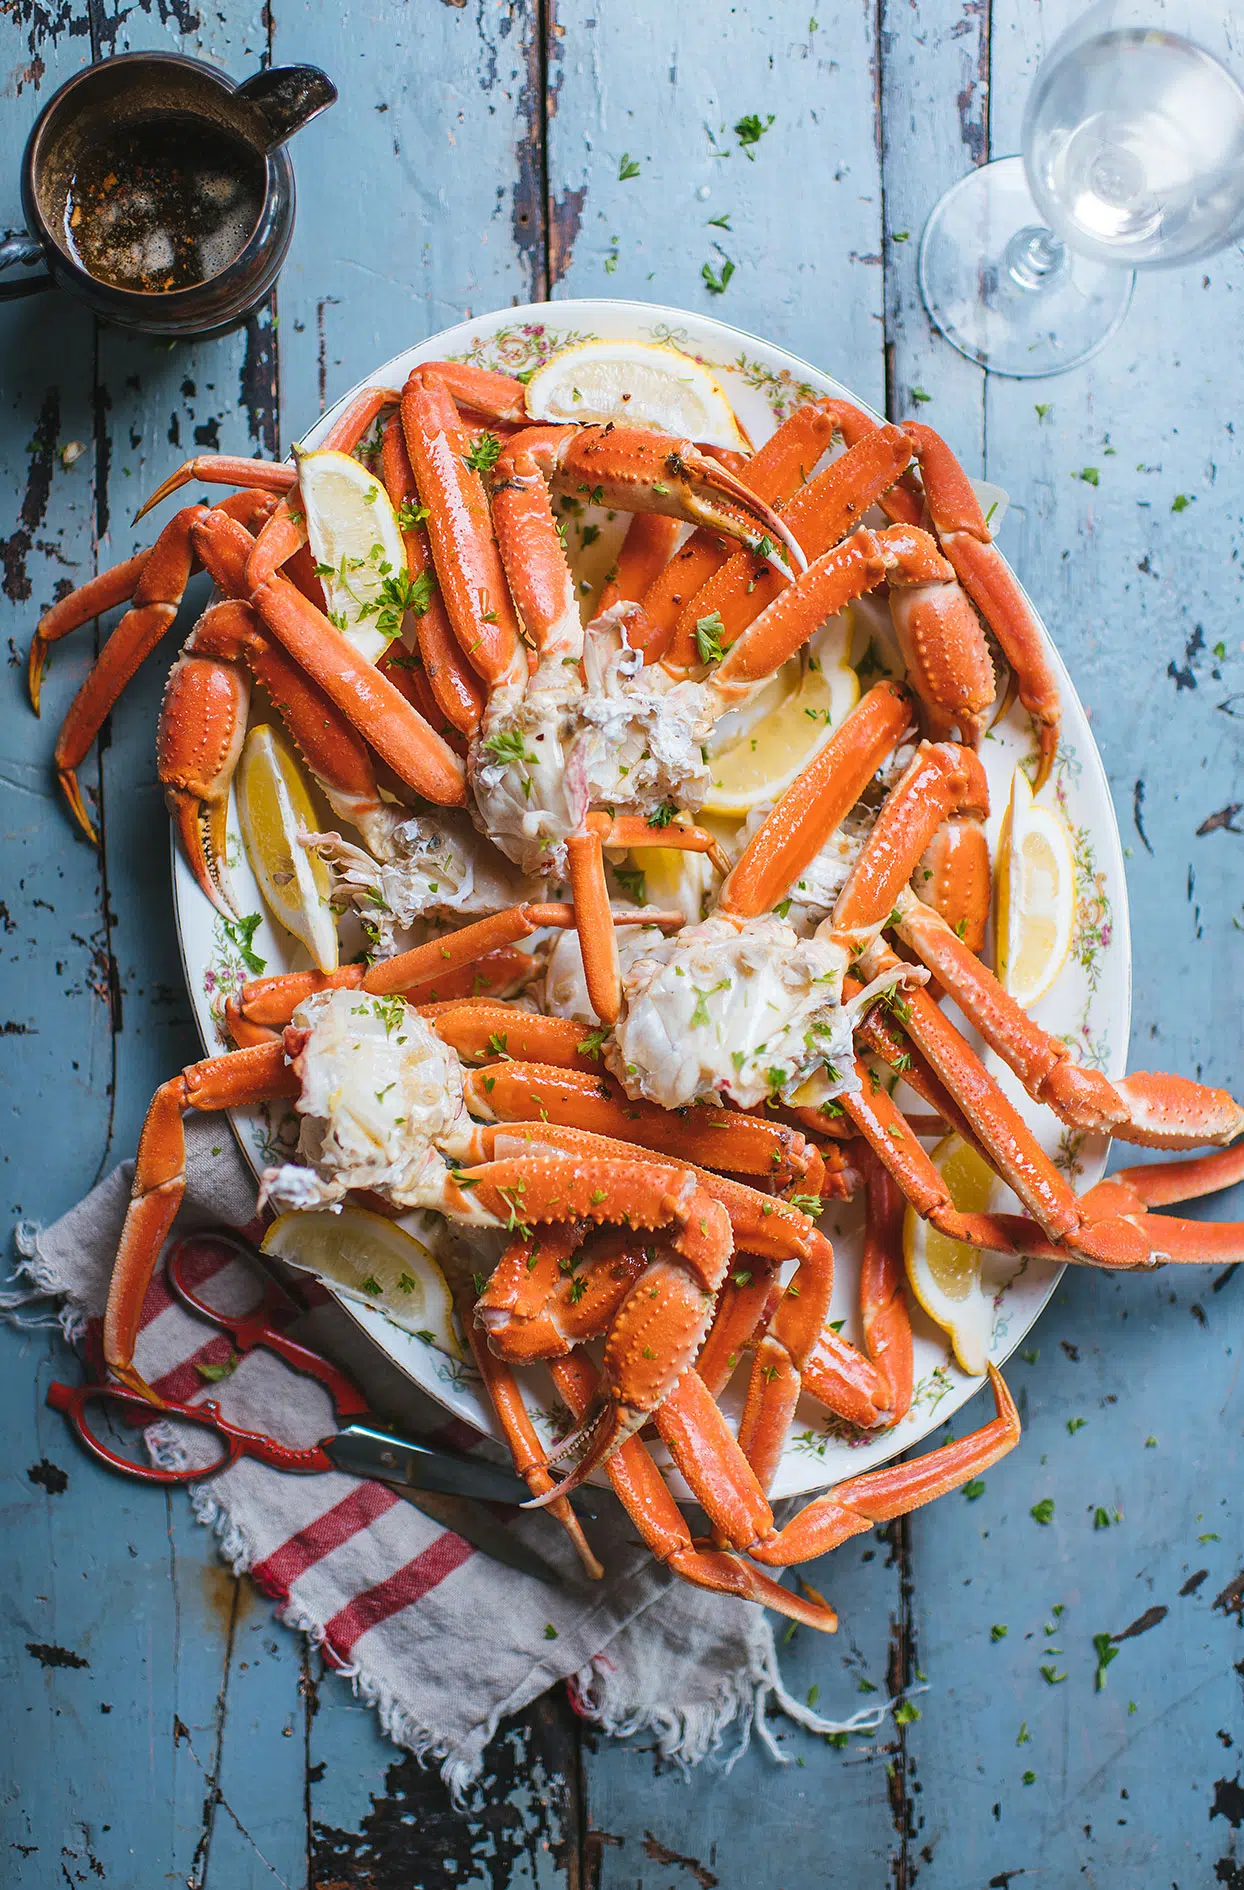 Snow crab with garlic and herbs butter